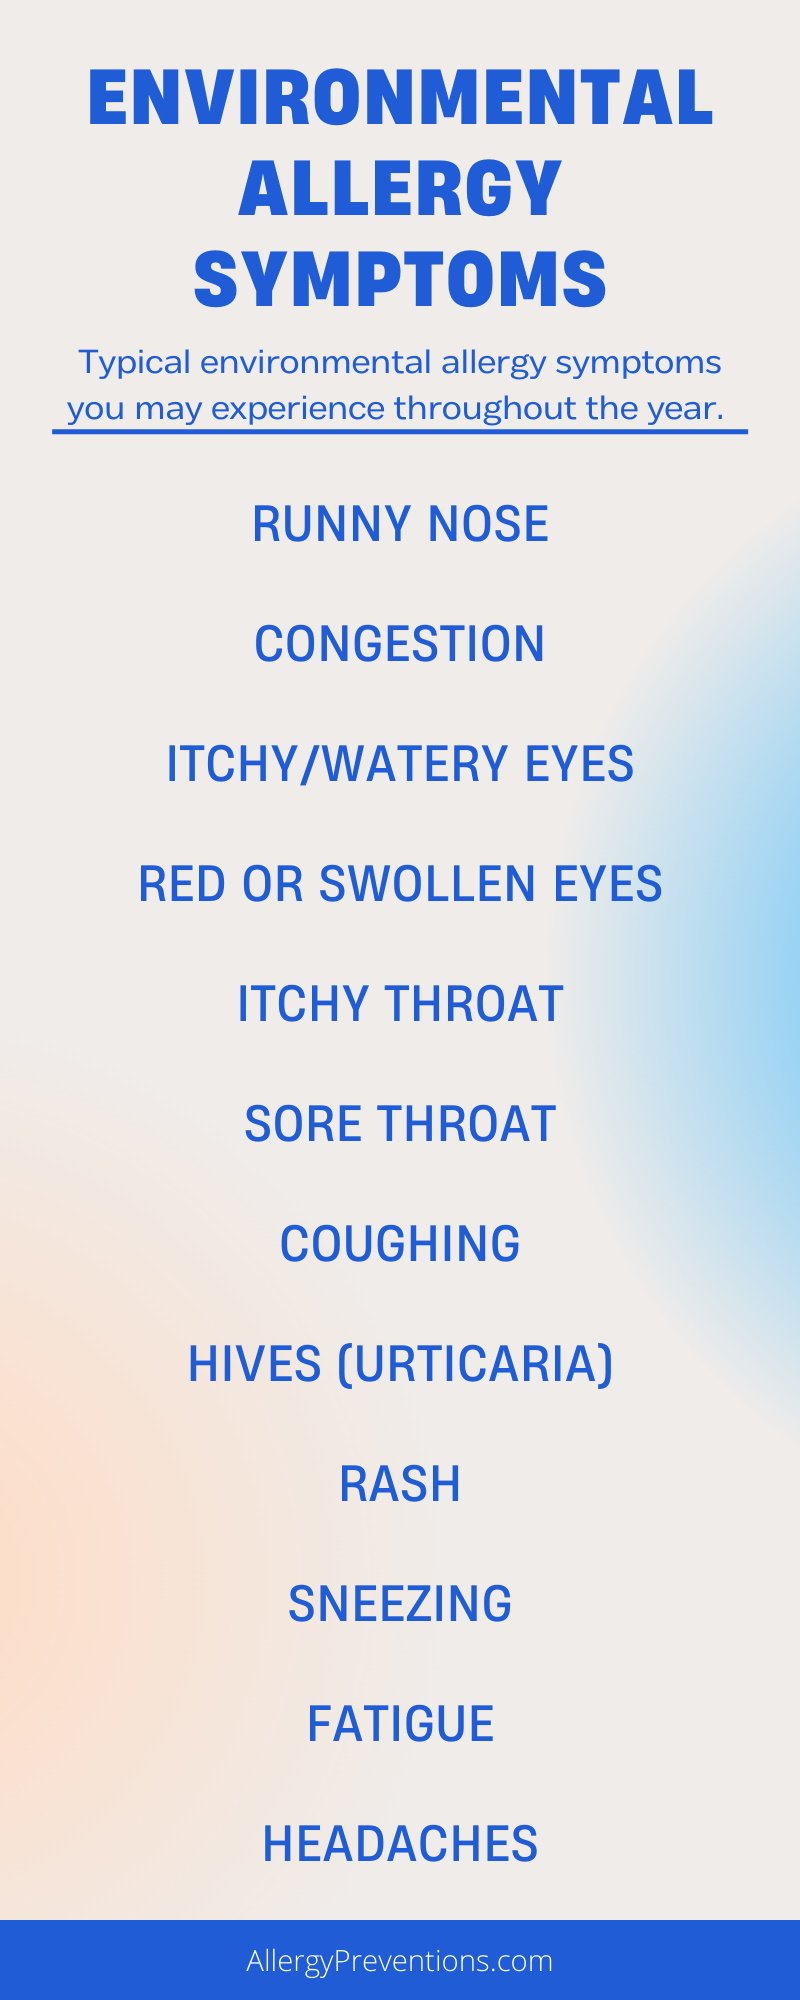 environmental-allergy-symptoms-infographic-runny nose, congestion, itchy/watery eyes, red or swollen eyes, itchy throat, sore throat, coughing, hives (urticaria), rash, sneezing, fatigue, headaches